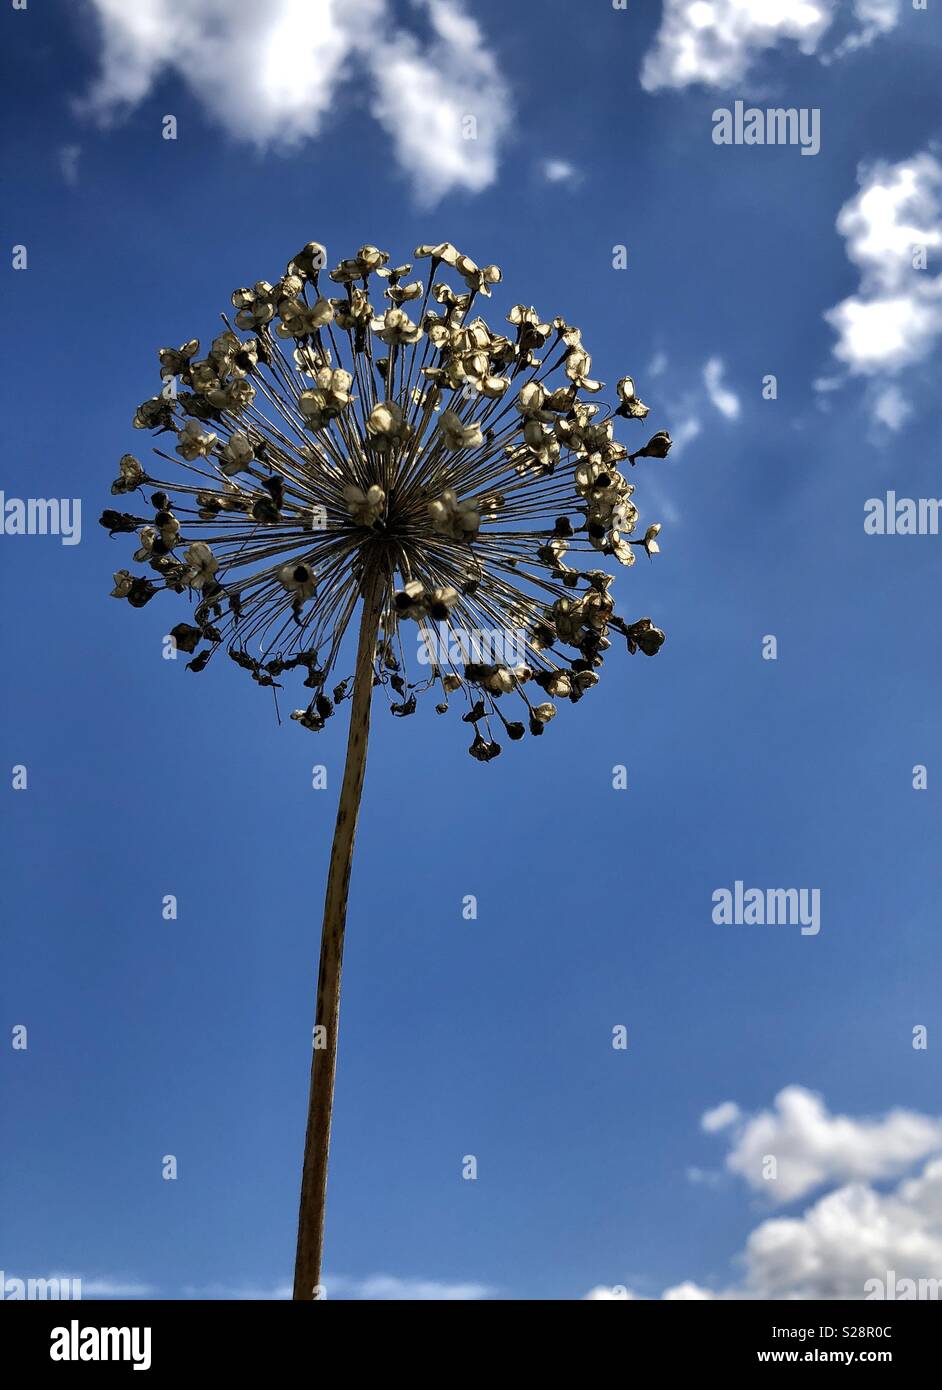 Dry seed head of an Allium plant against a blue sky Stock Photo